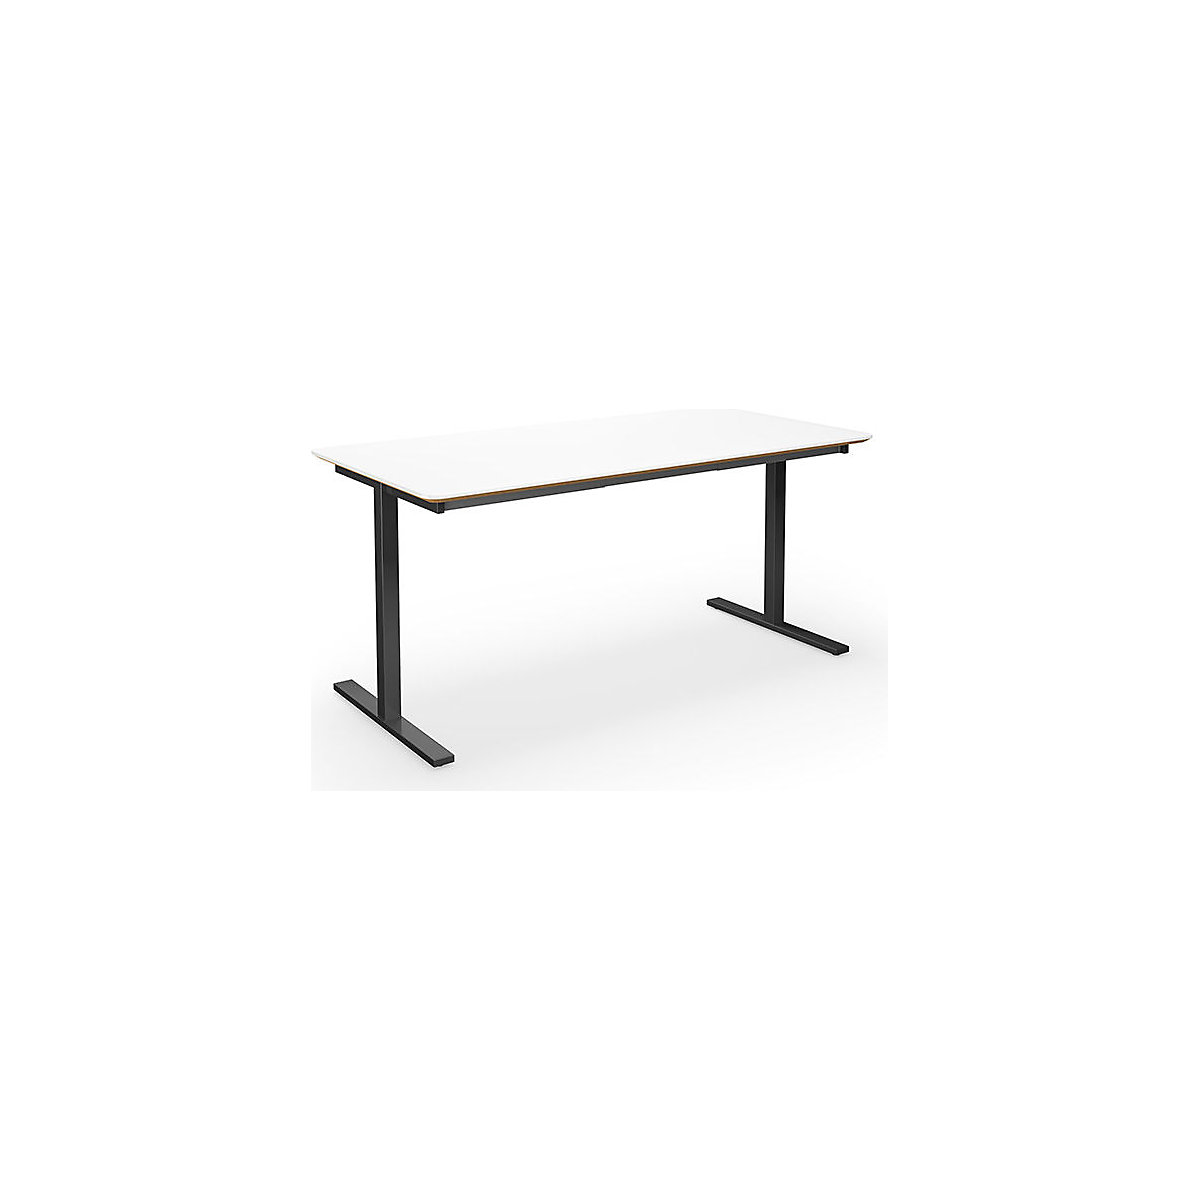 DUO-T Trend multi-purpose desk, straight tabletop, rounded corners, WxD 1600 x 800 mm, white, black-1